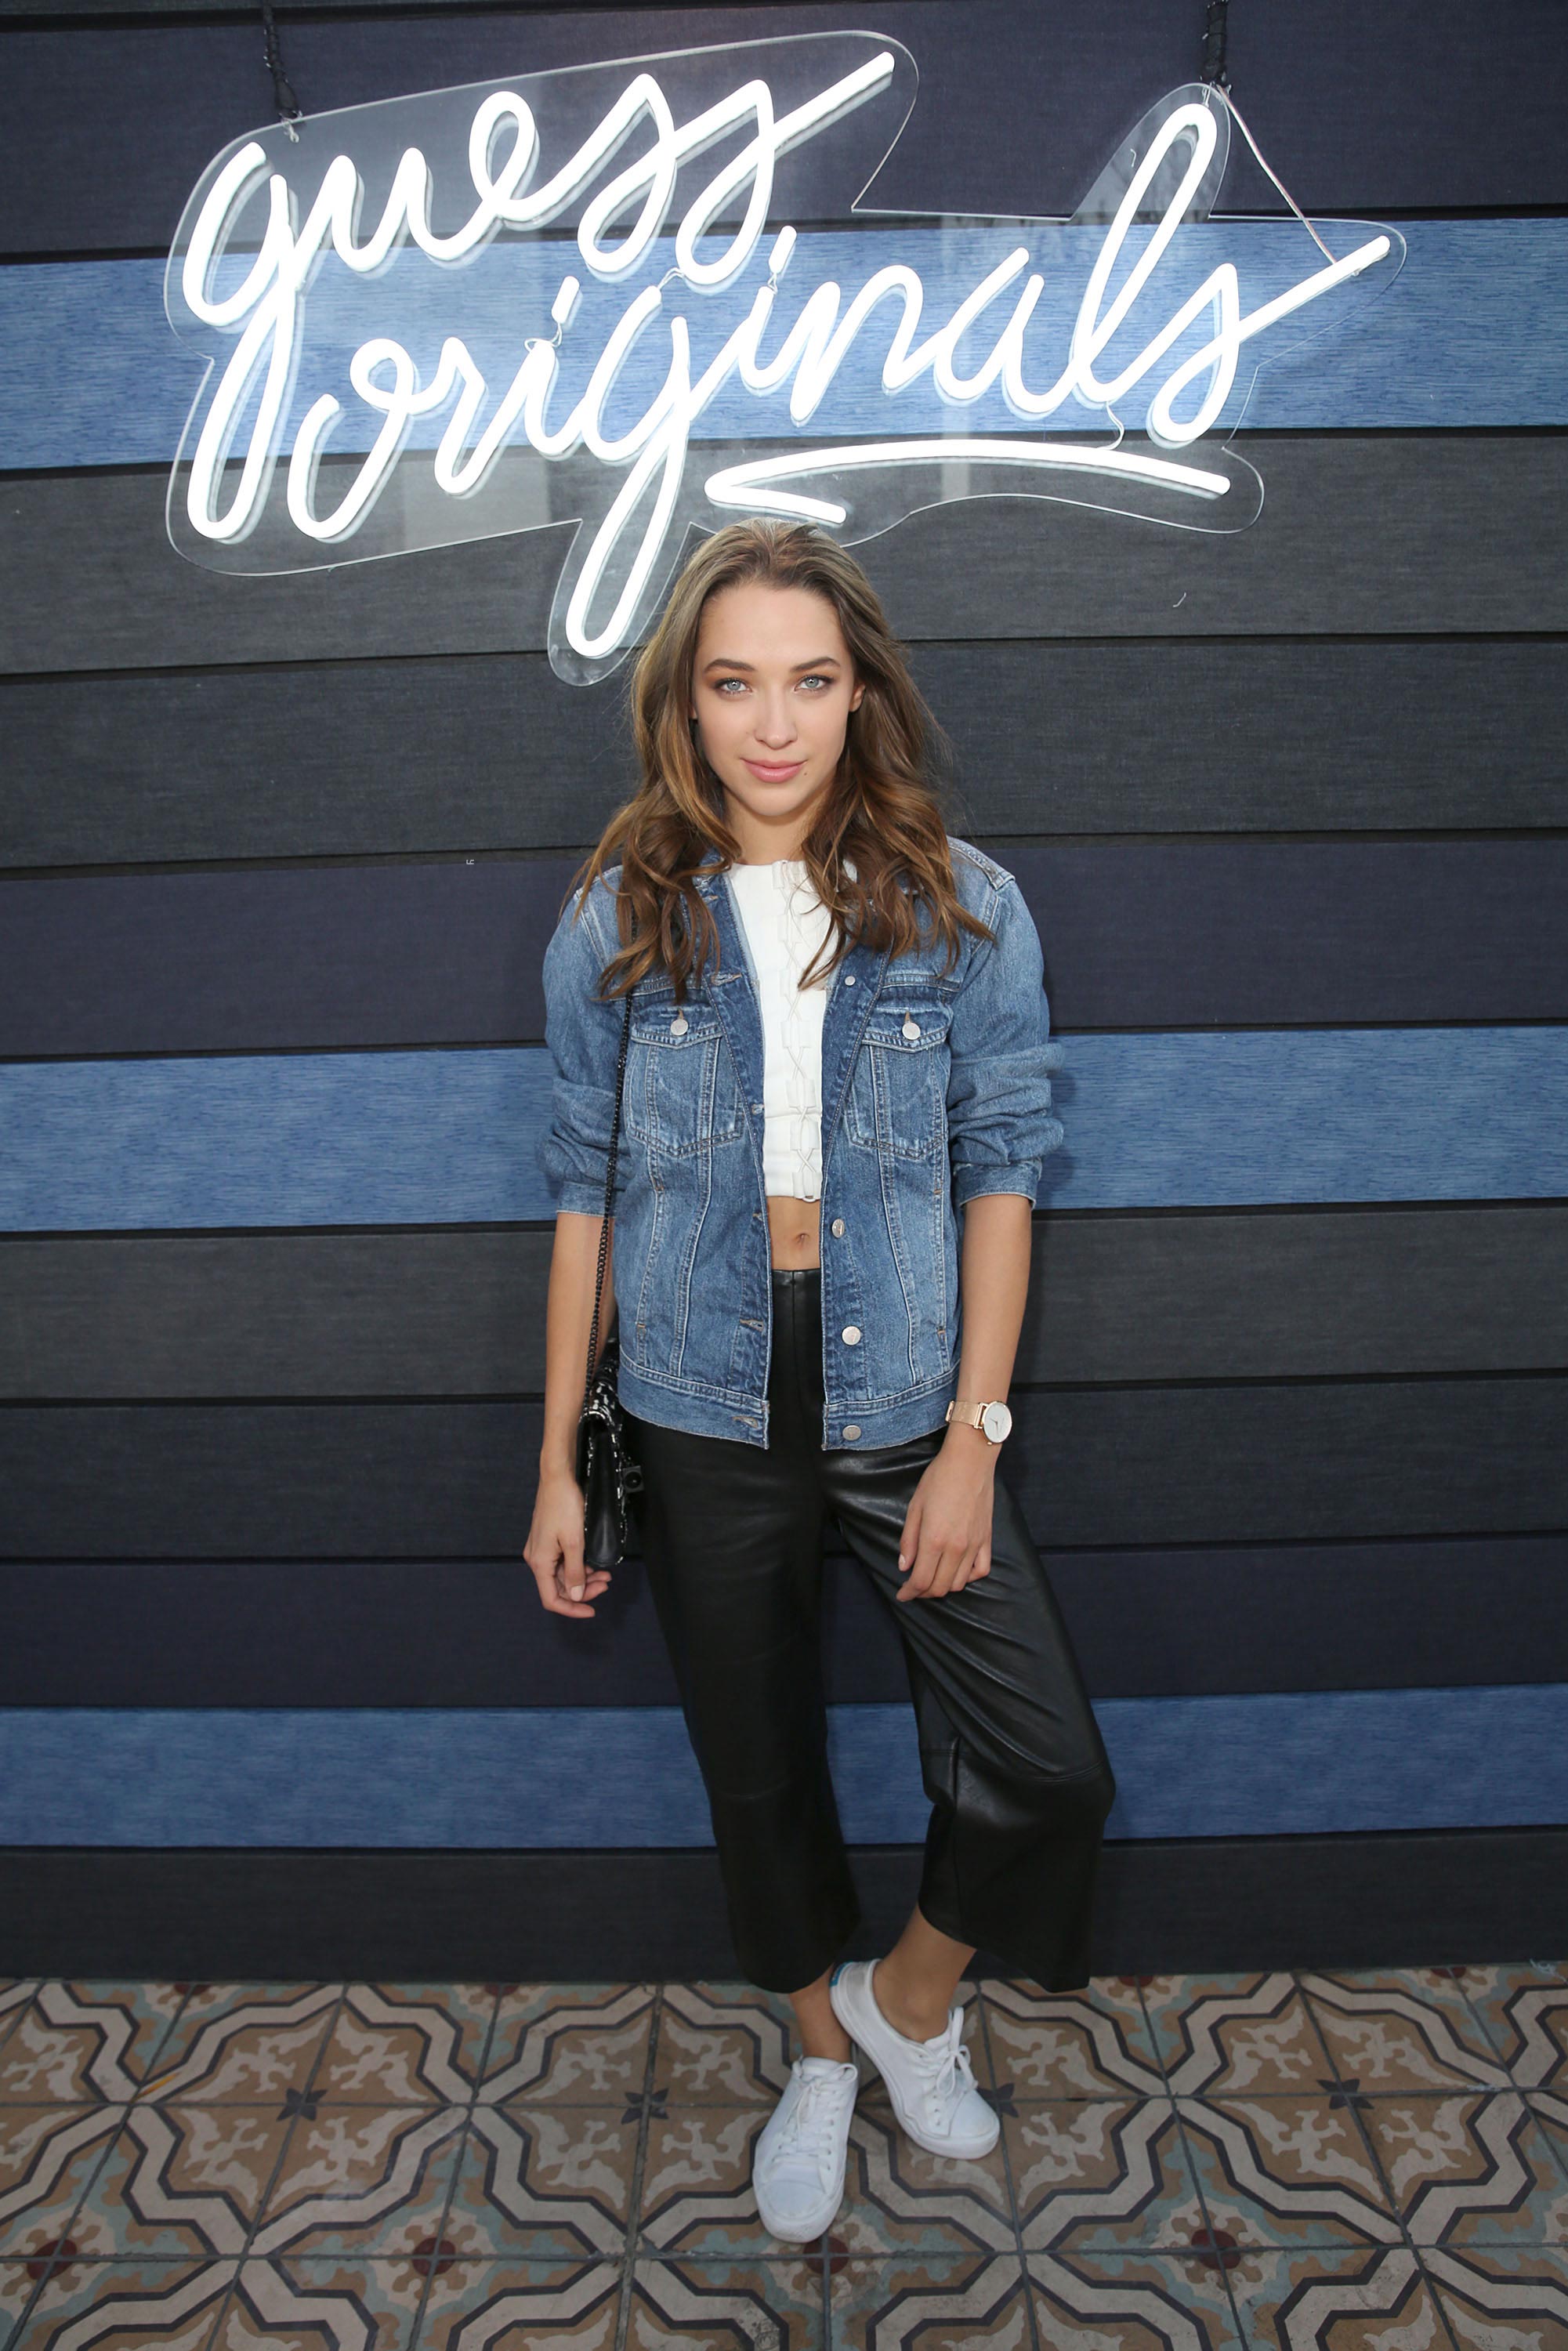 Ksenia attends the GUESS Originals cocktail party